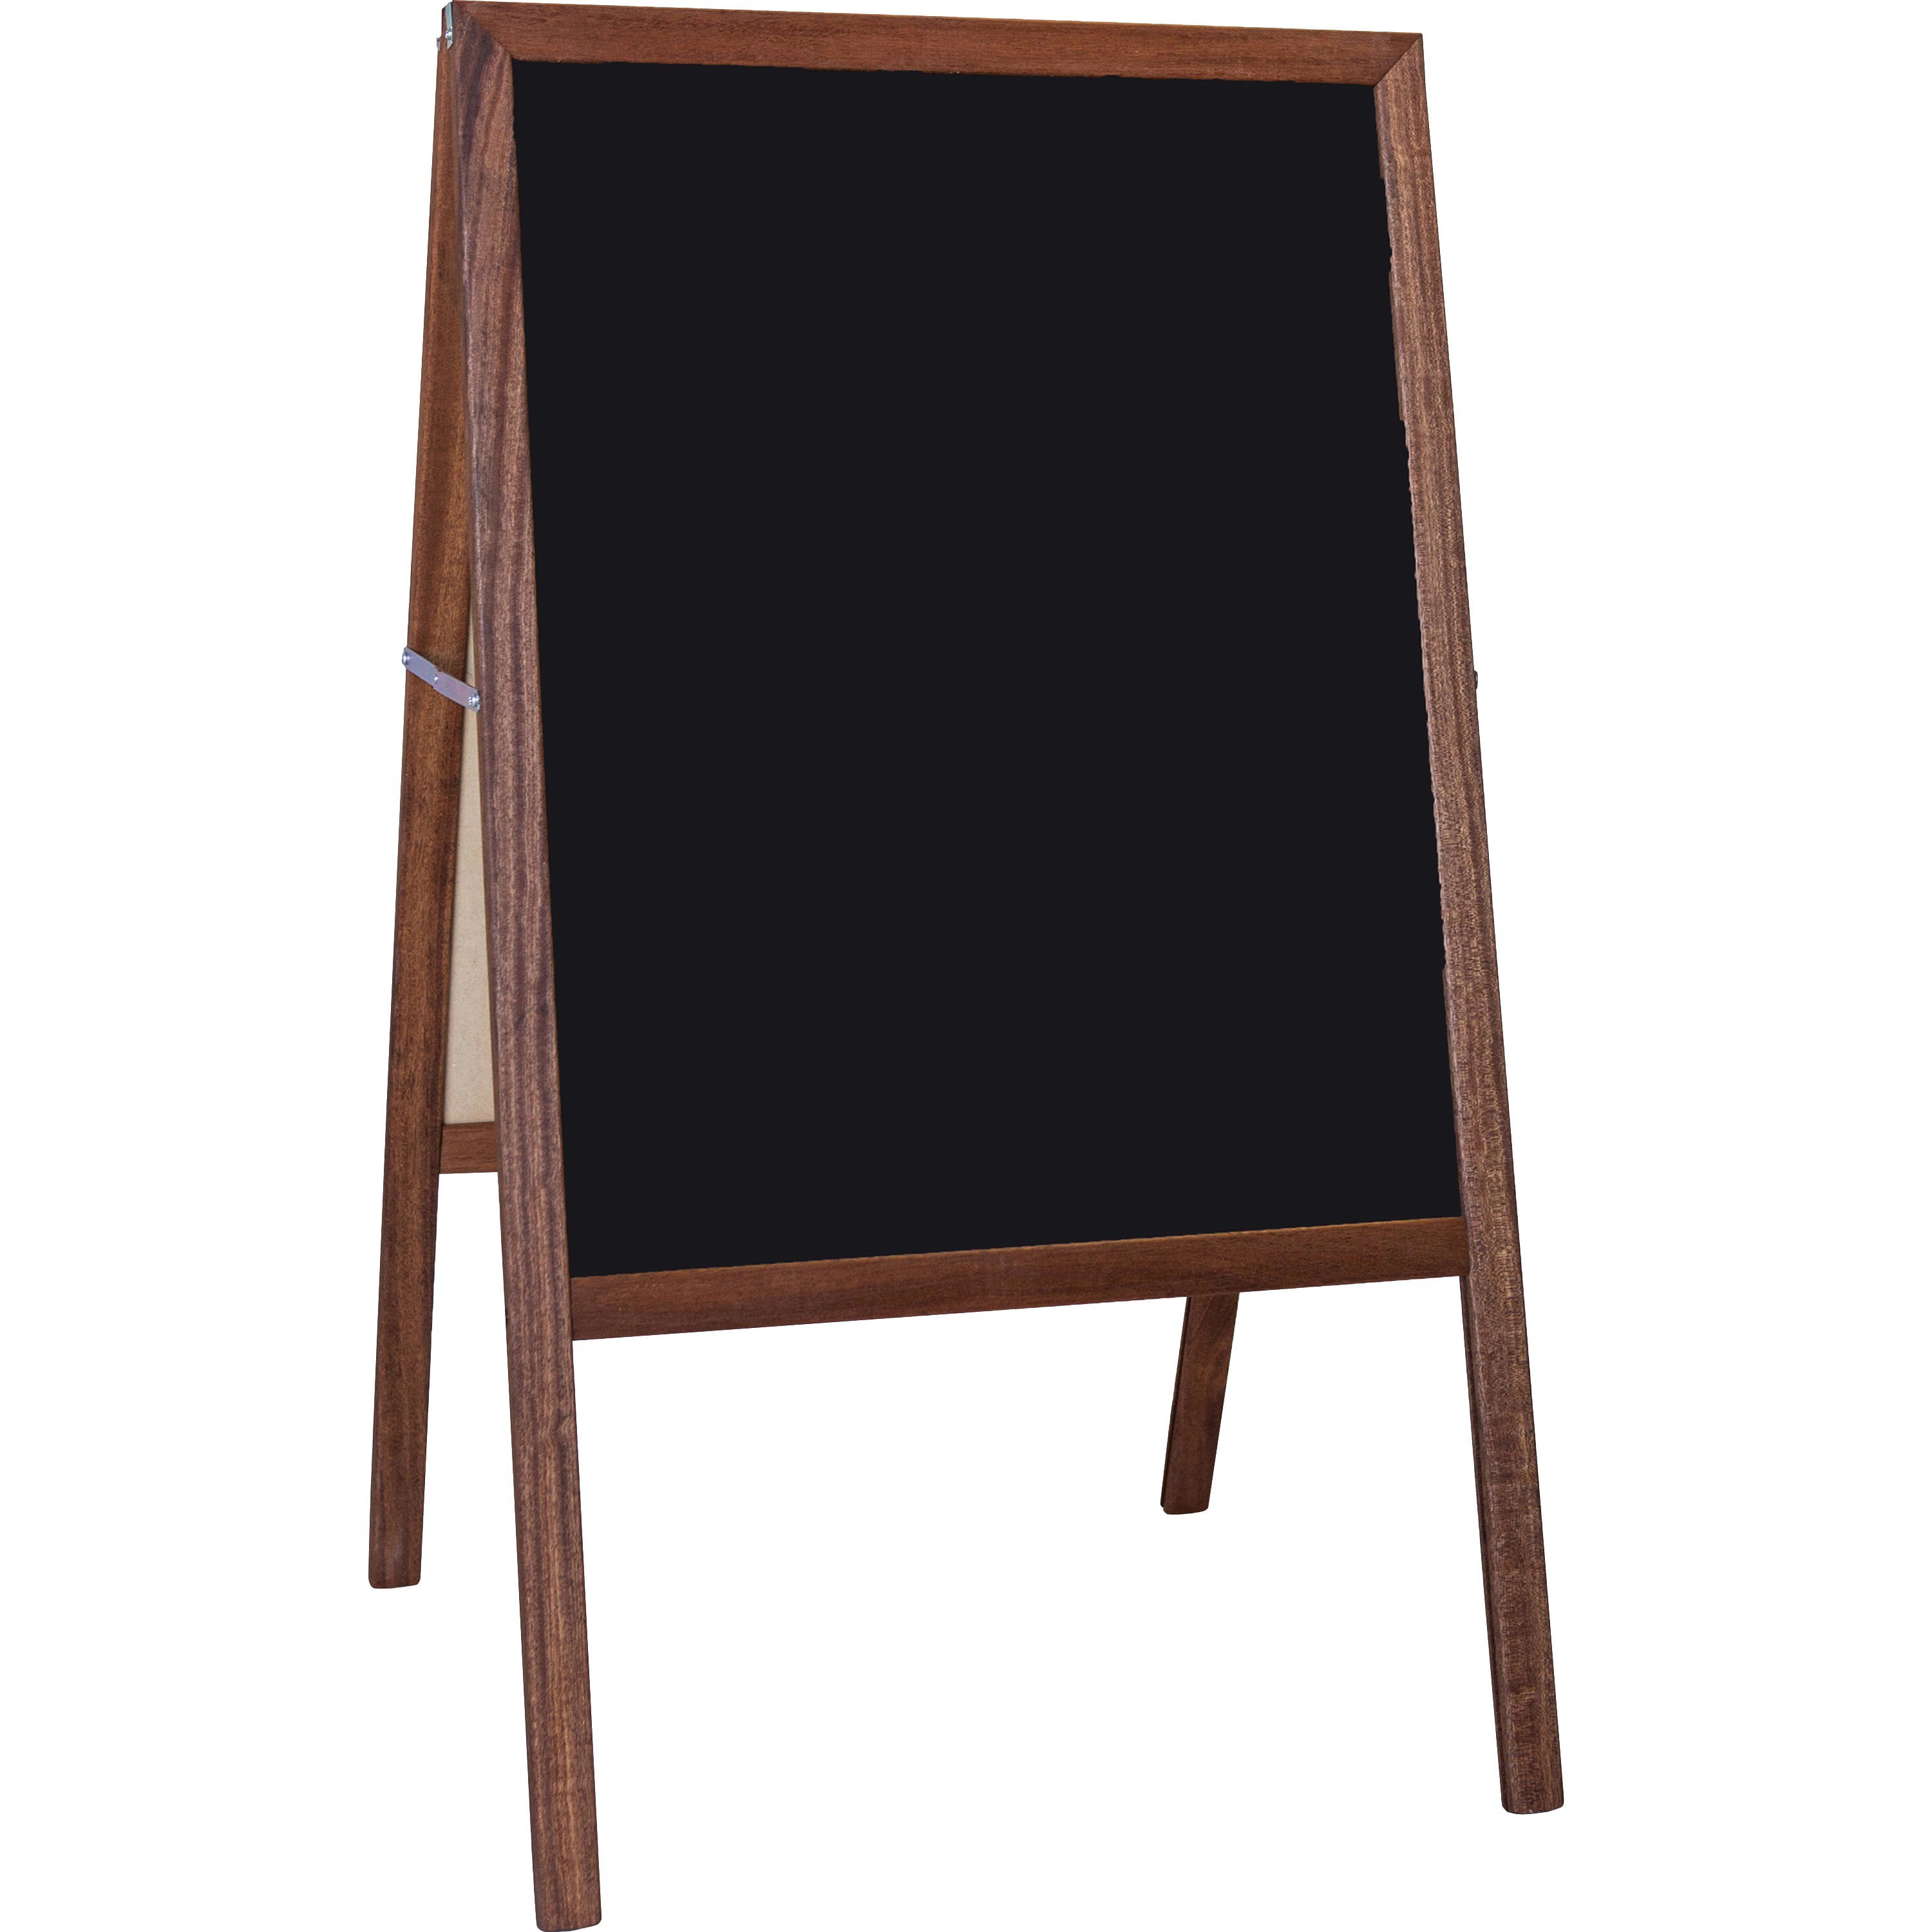 Rustic Chalkboard Sign Wooden Frame with Adjustable Stand Reversible 11x11 